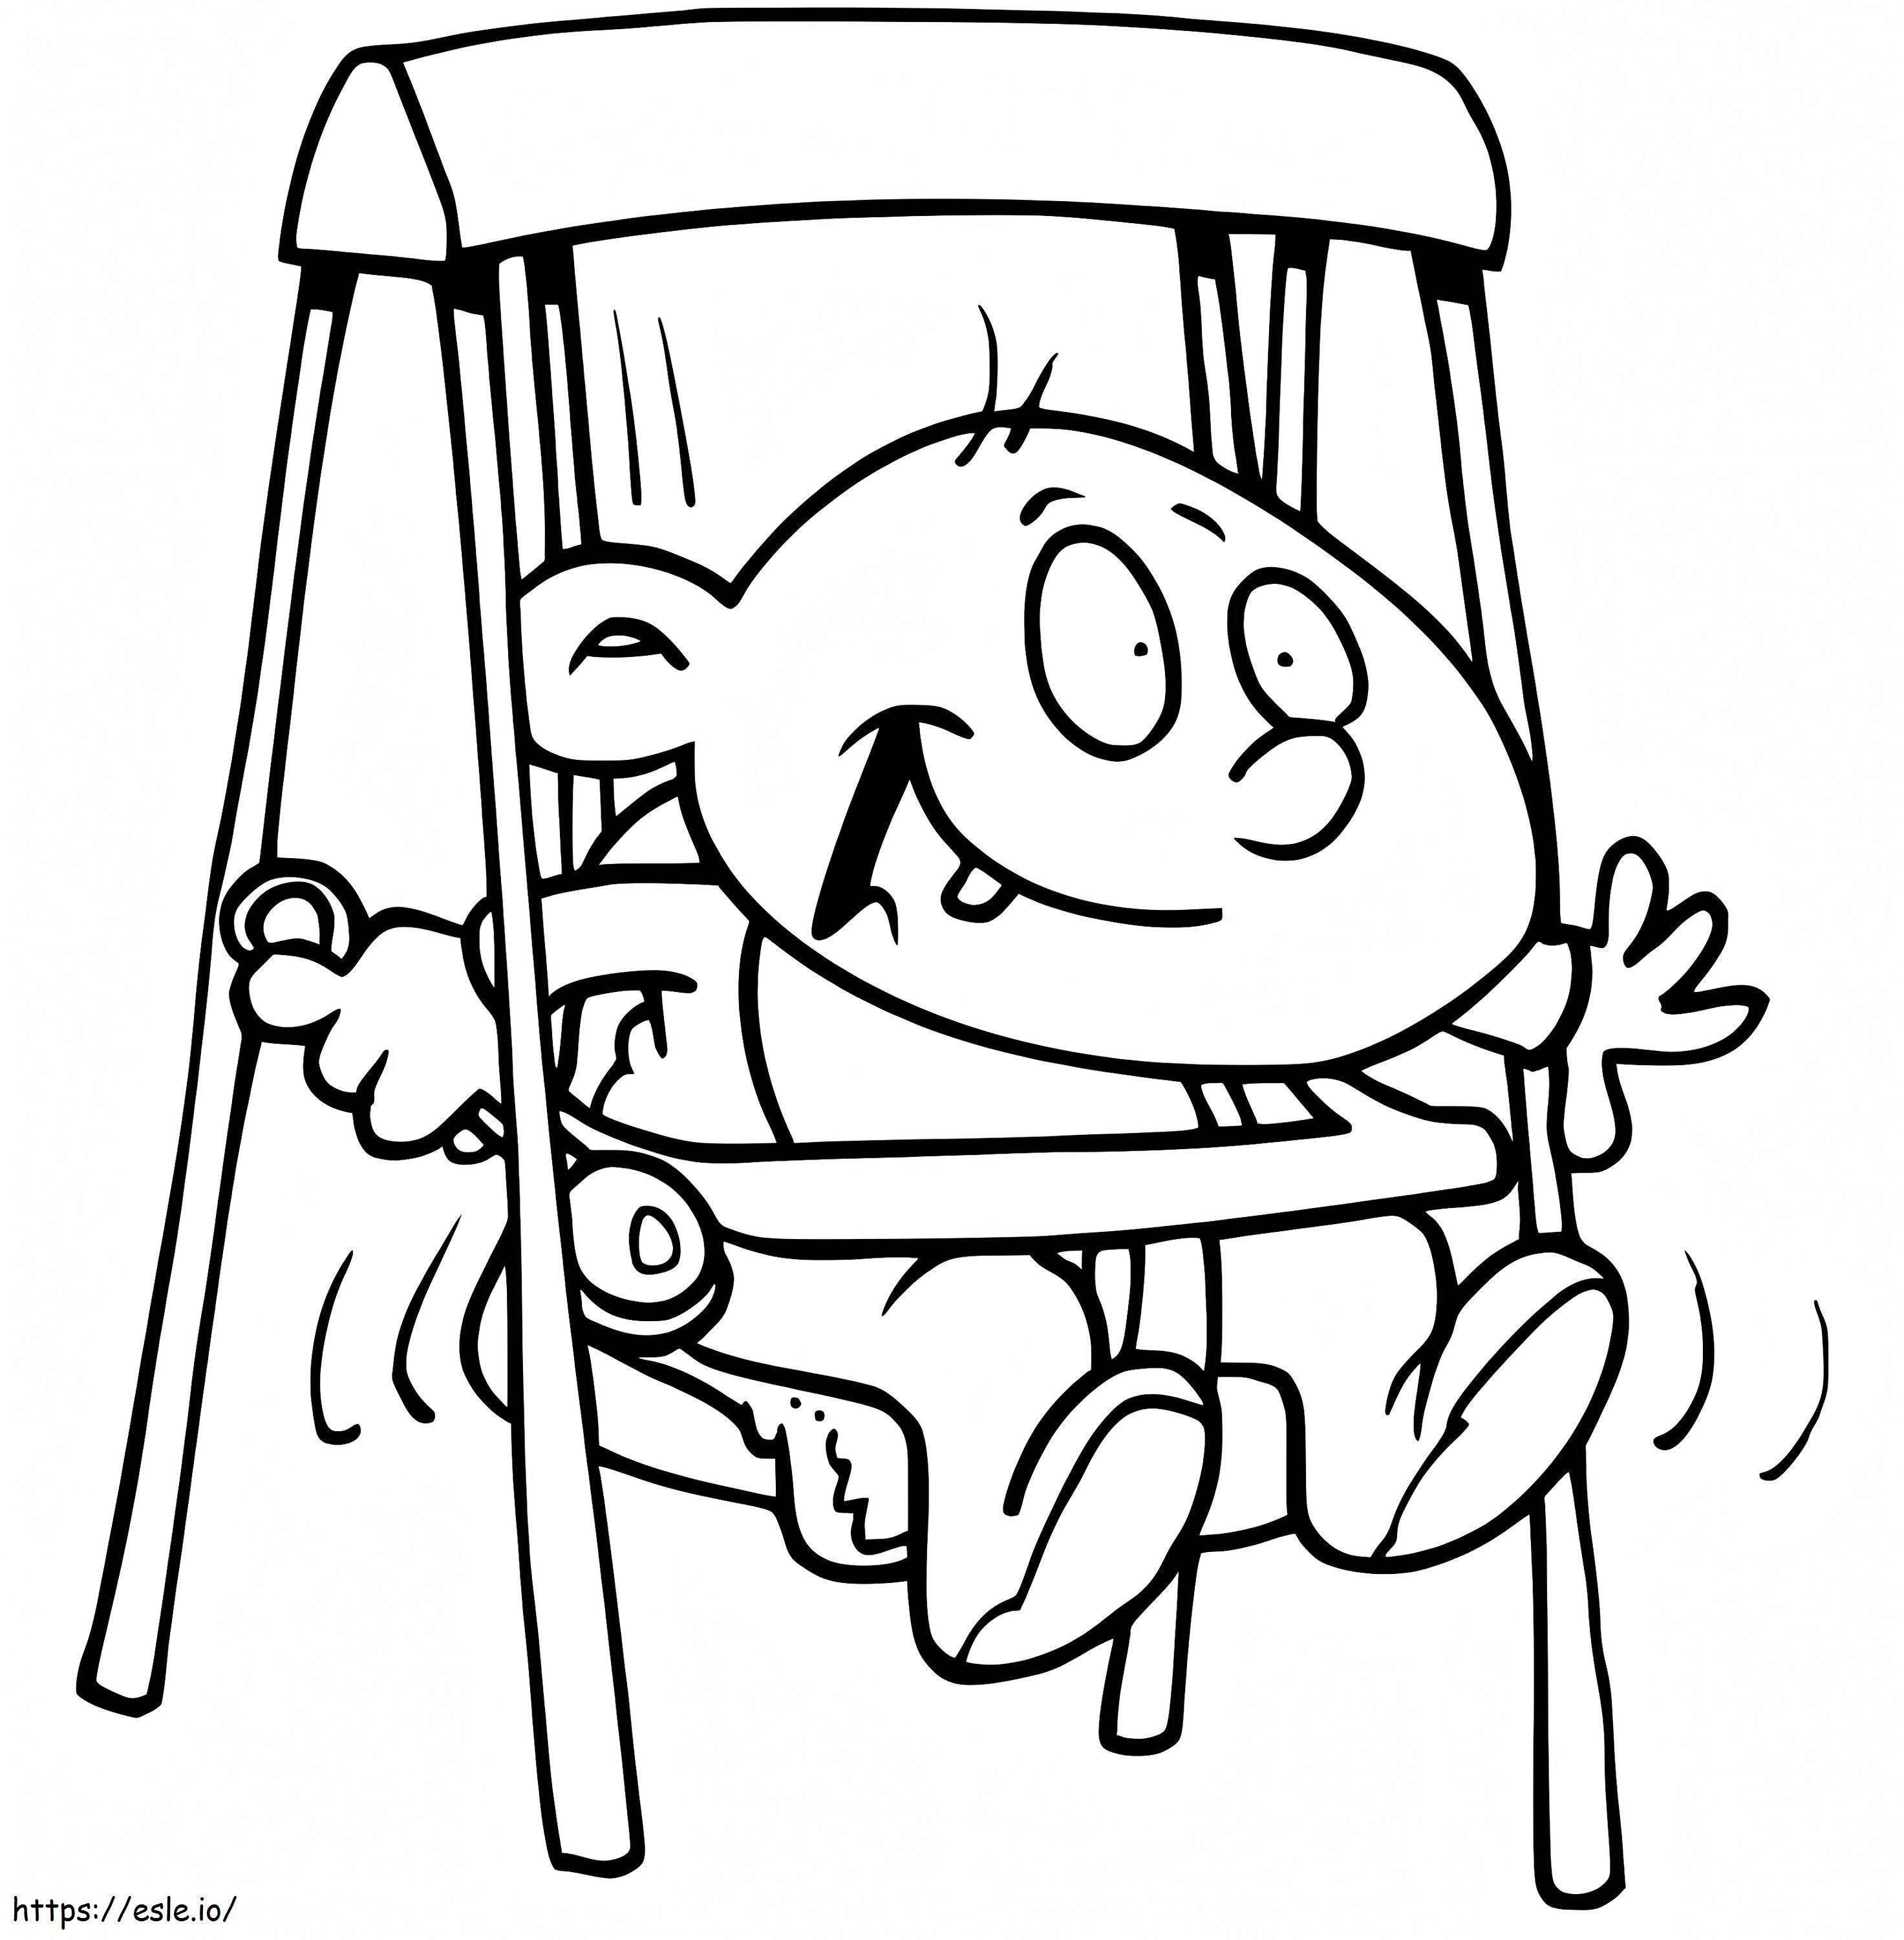 Naughty Baby Boy coloring page